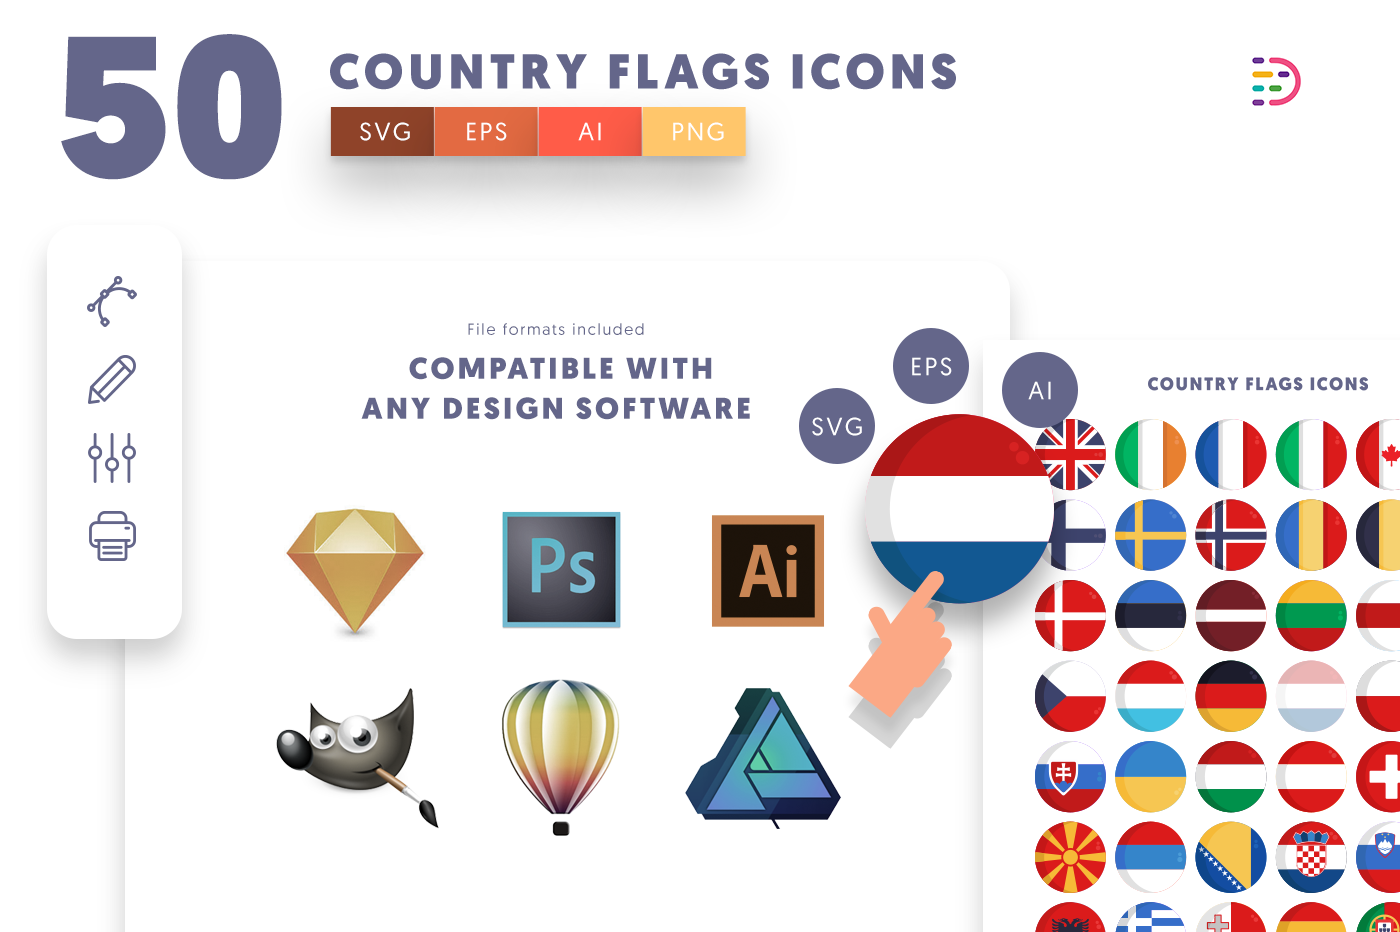  full vector 50 Country Flags Icons EPS, SVG, PNG